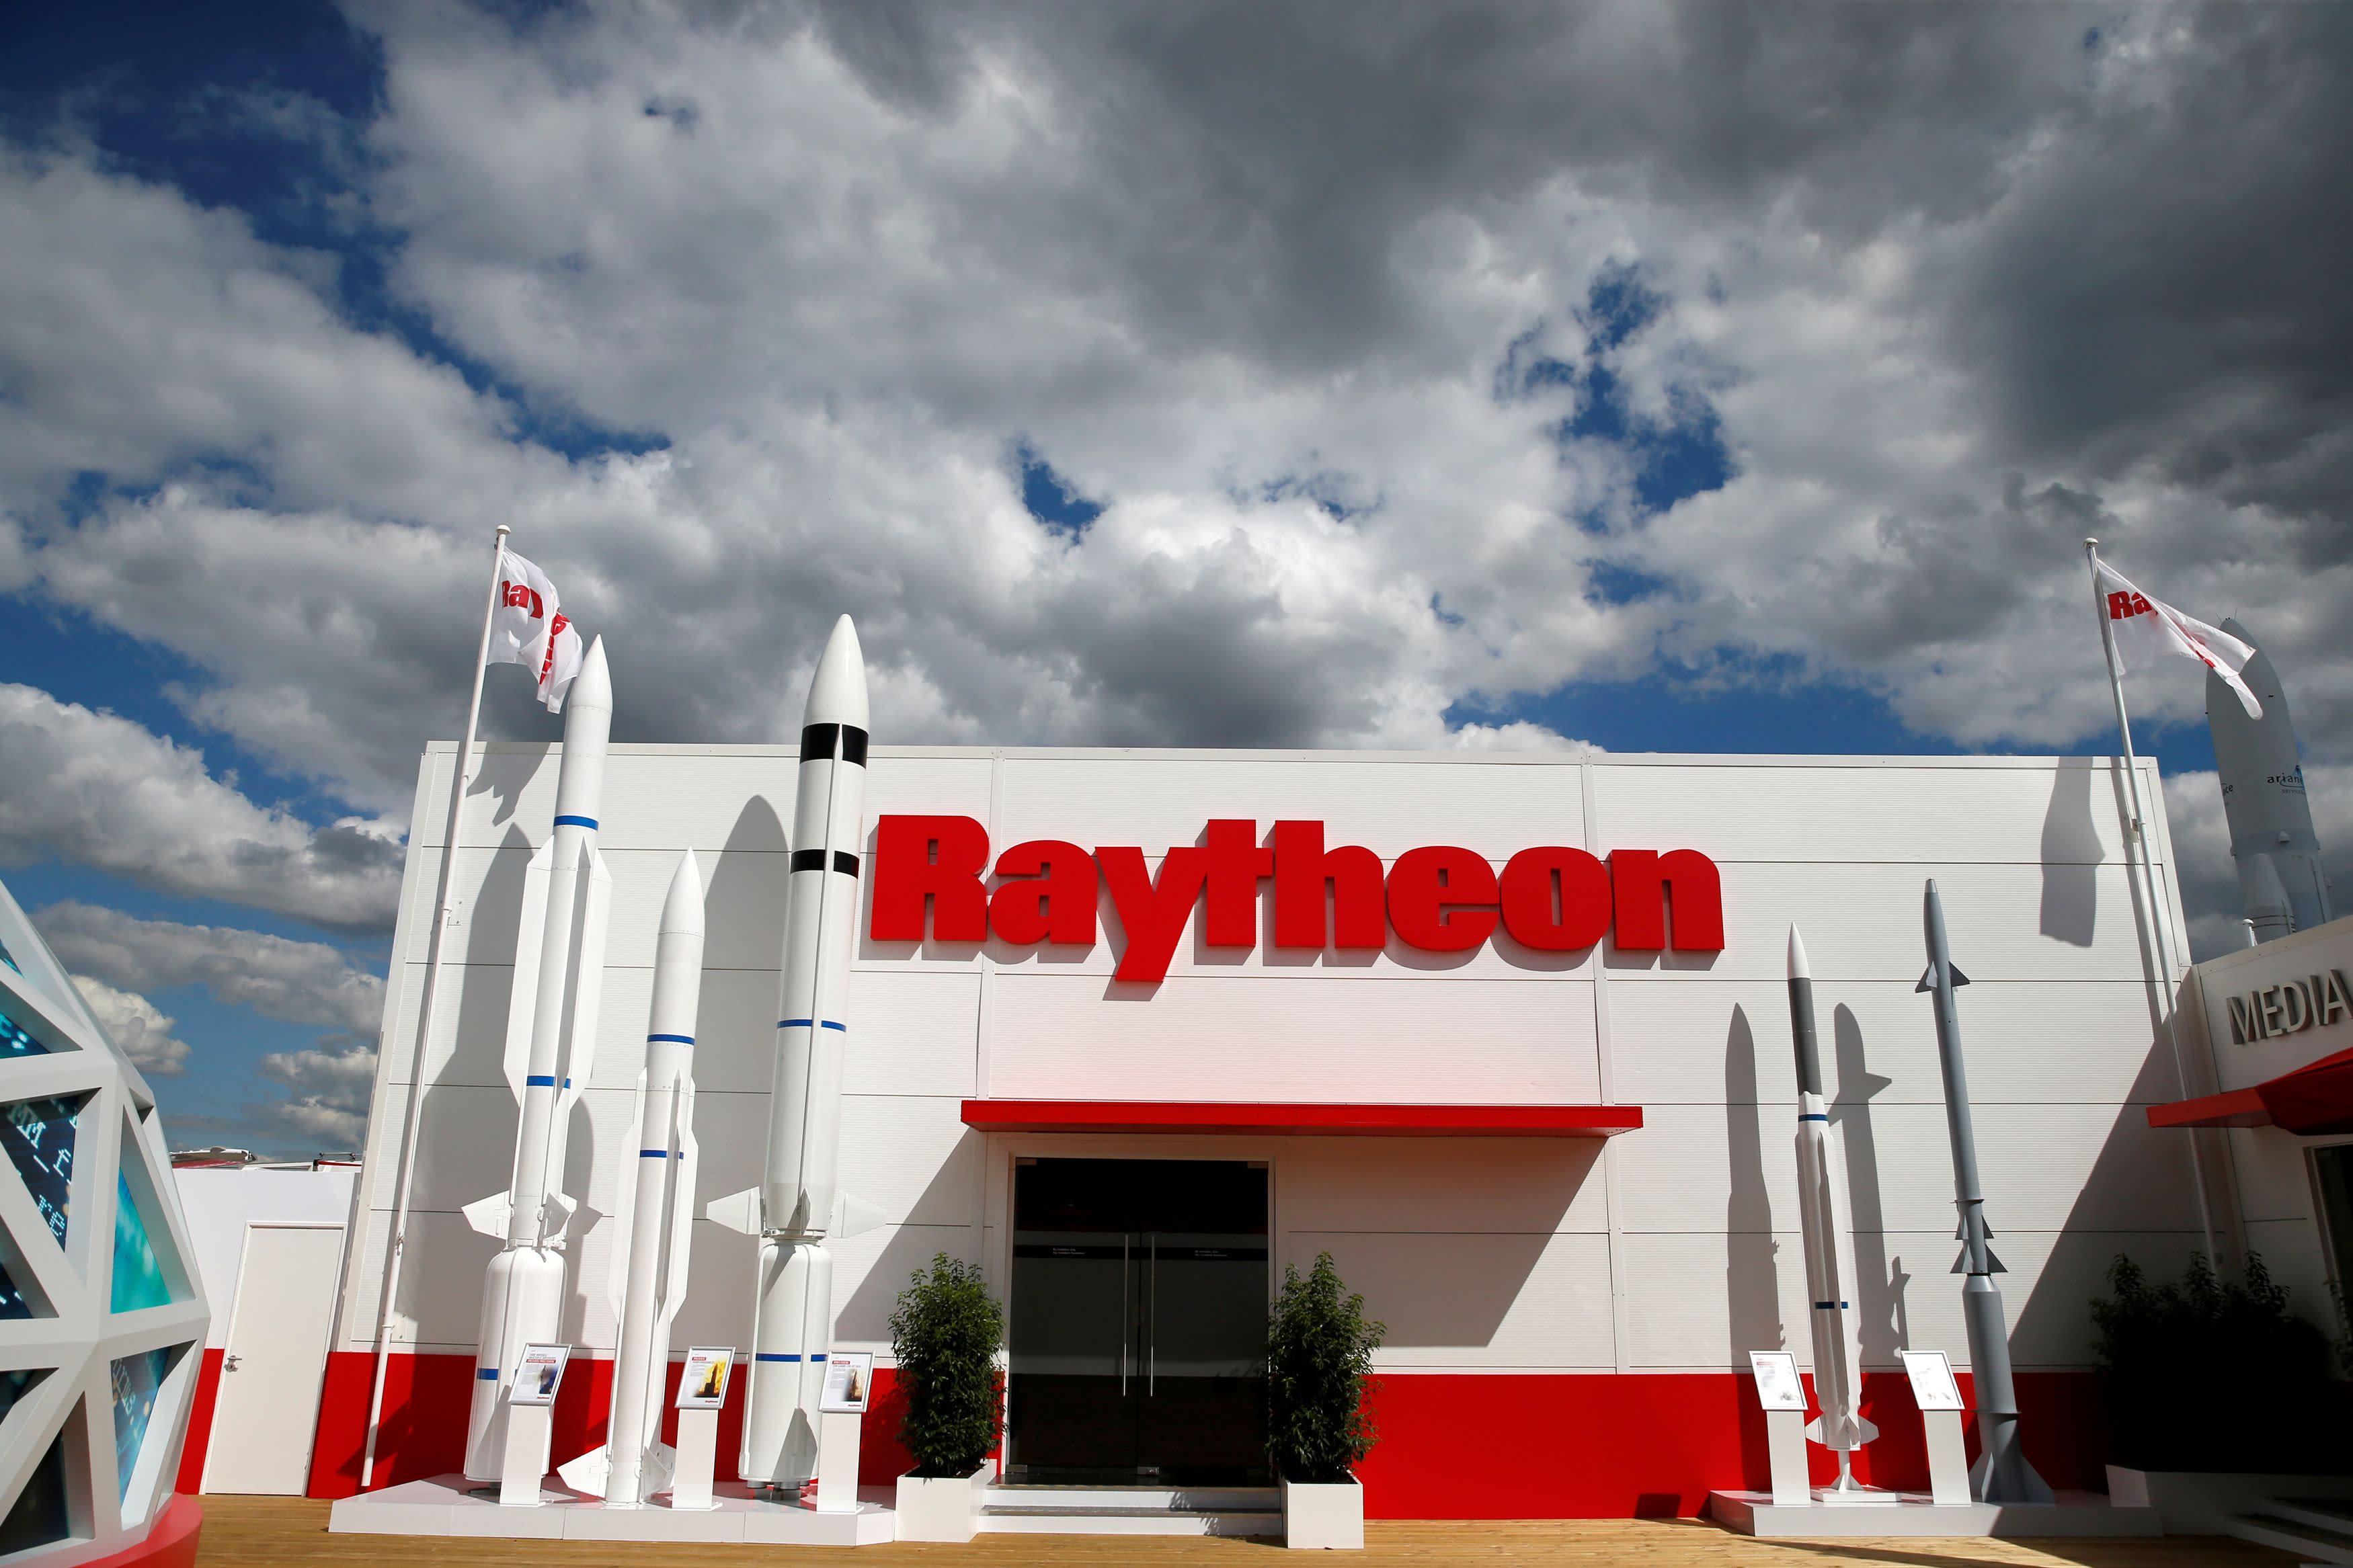 Stocks making the biggest moves midday: Raytheon, Block, Tesla, Foot Locker and more